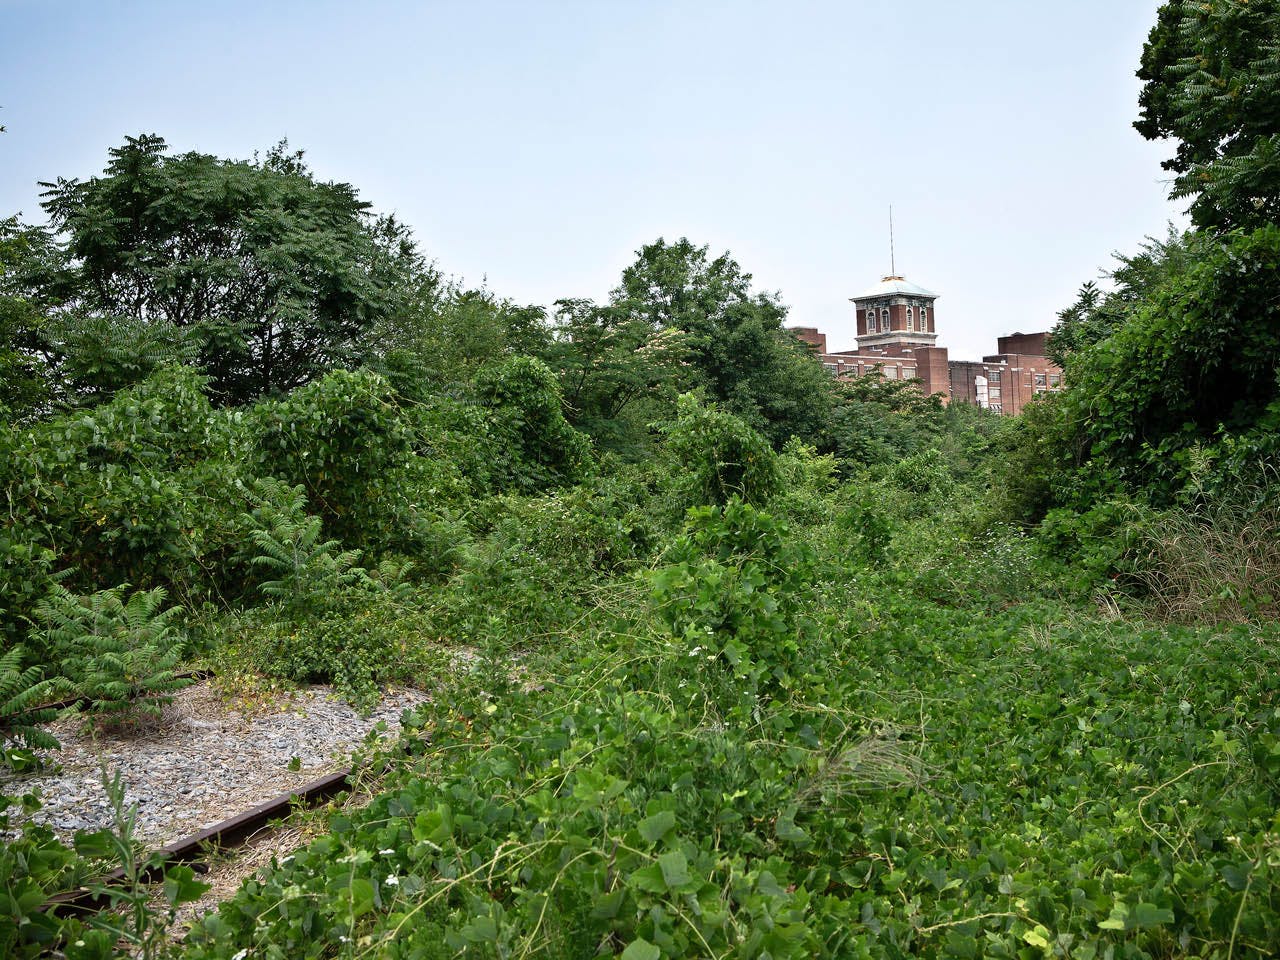 Railroad tracks overgrown with kudzu with Ponce City Market in the background in 2008 before the Beltline's Eastside Trail was built. (Photo Credit: Christopher T. Martin)